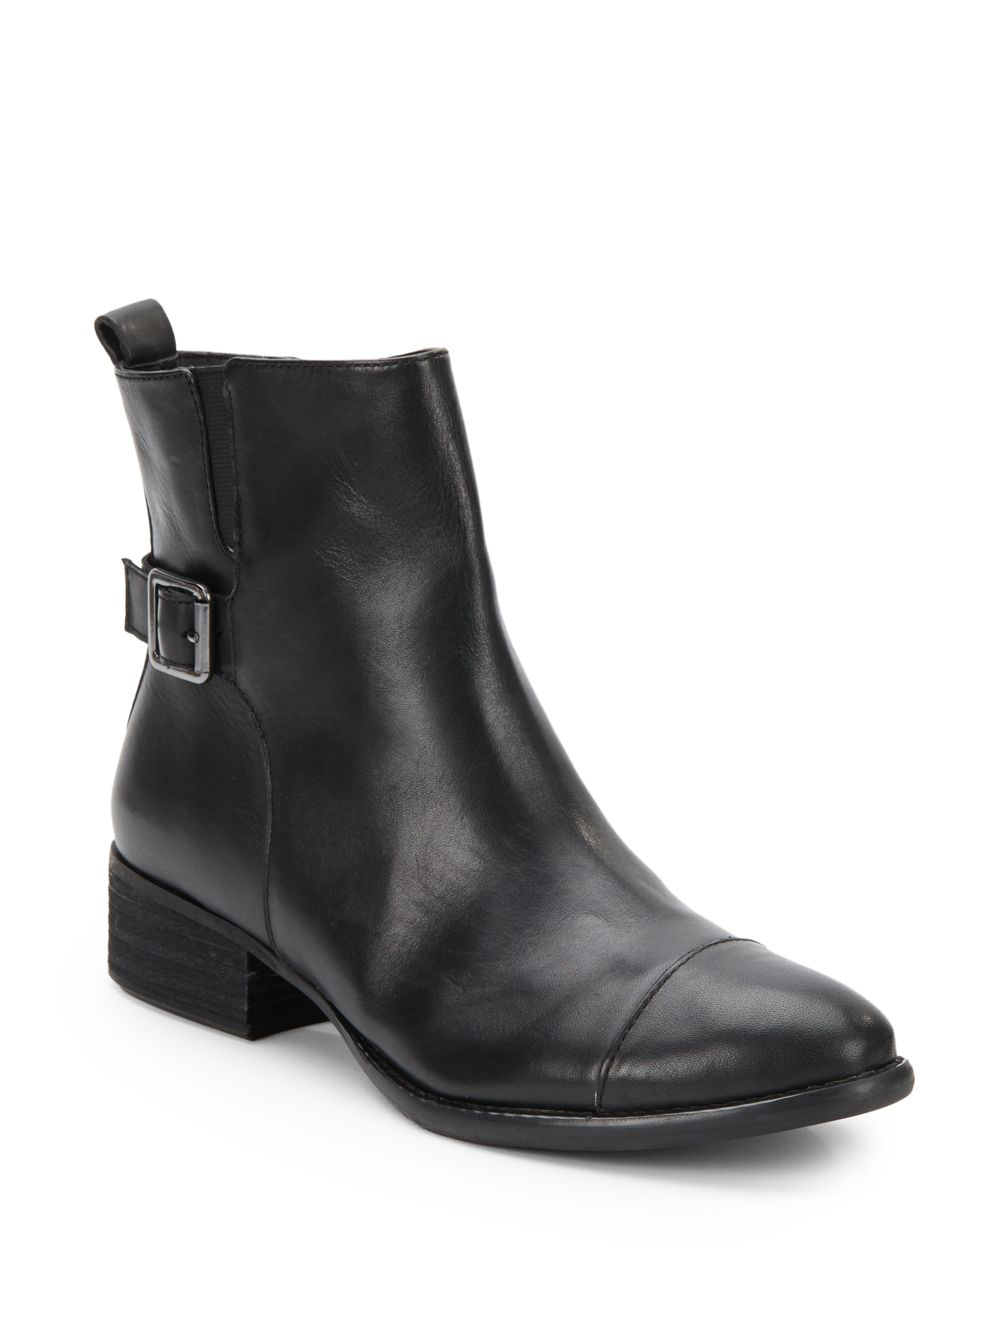 Donald j pliner Plata Leather Ankle Boots in Black | Lyst